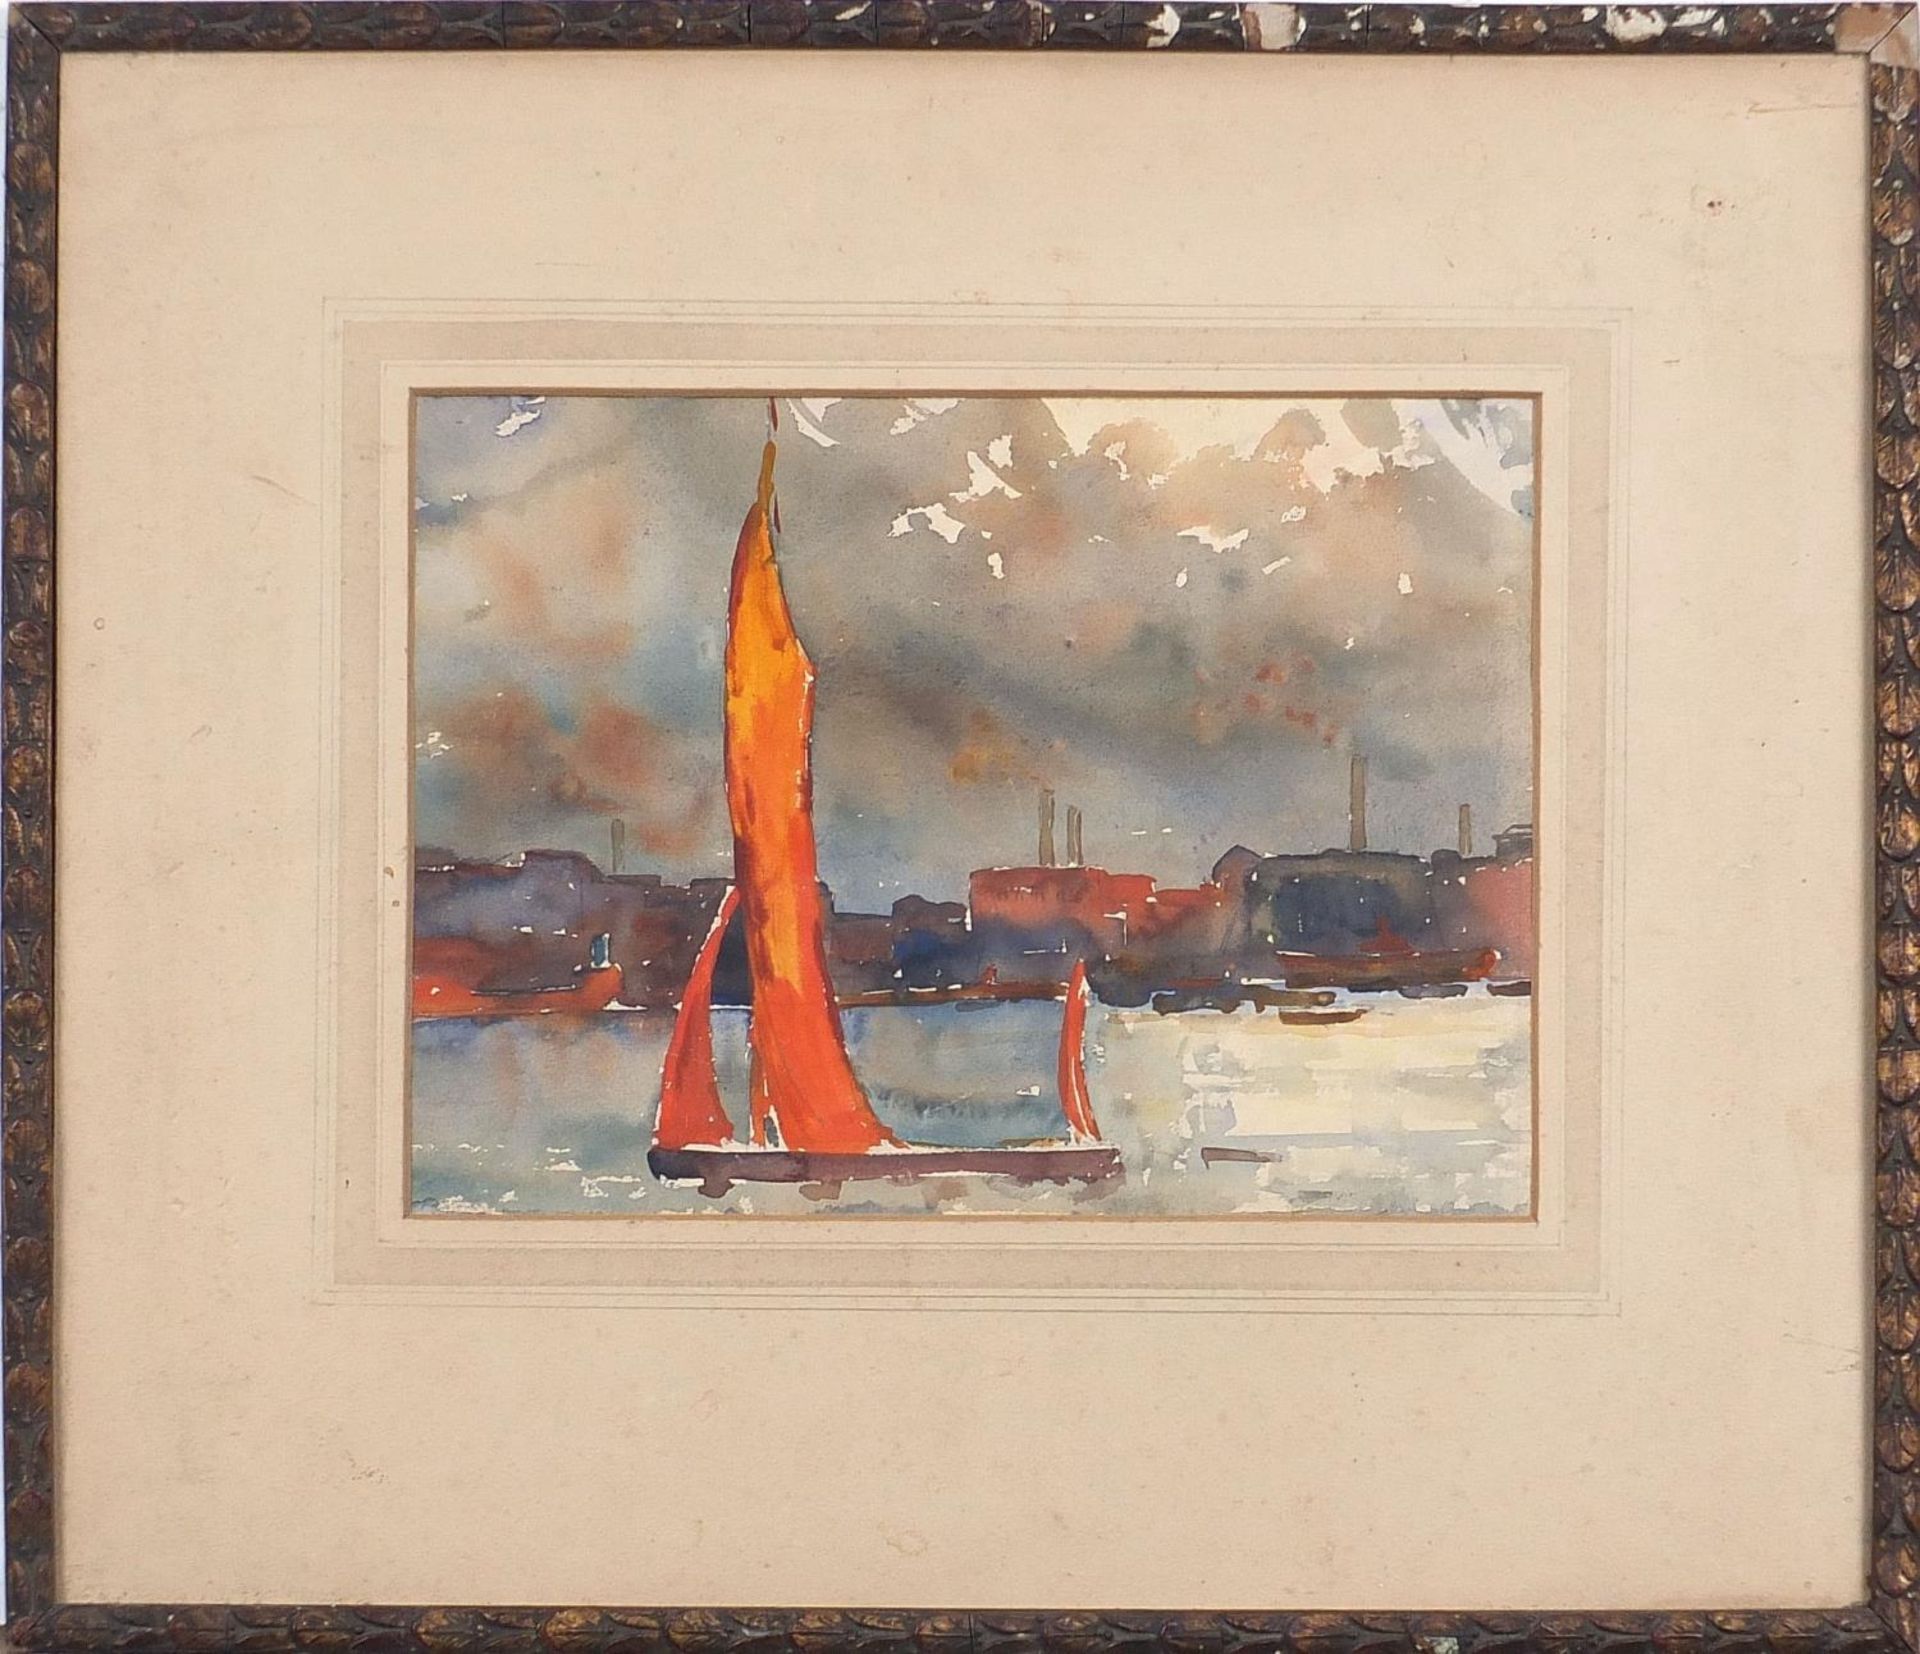 Sailing boat on water before buildings, watercolour, mounted and framed, 28cm x 25cm excluding the - Image 2 of 4